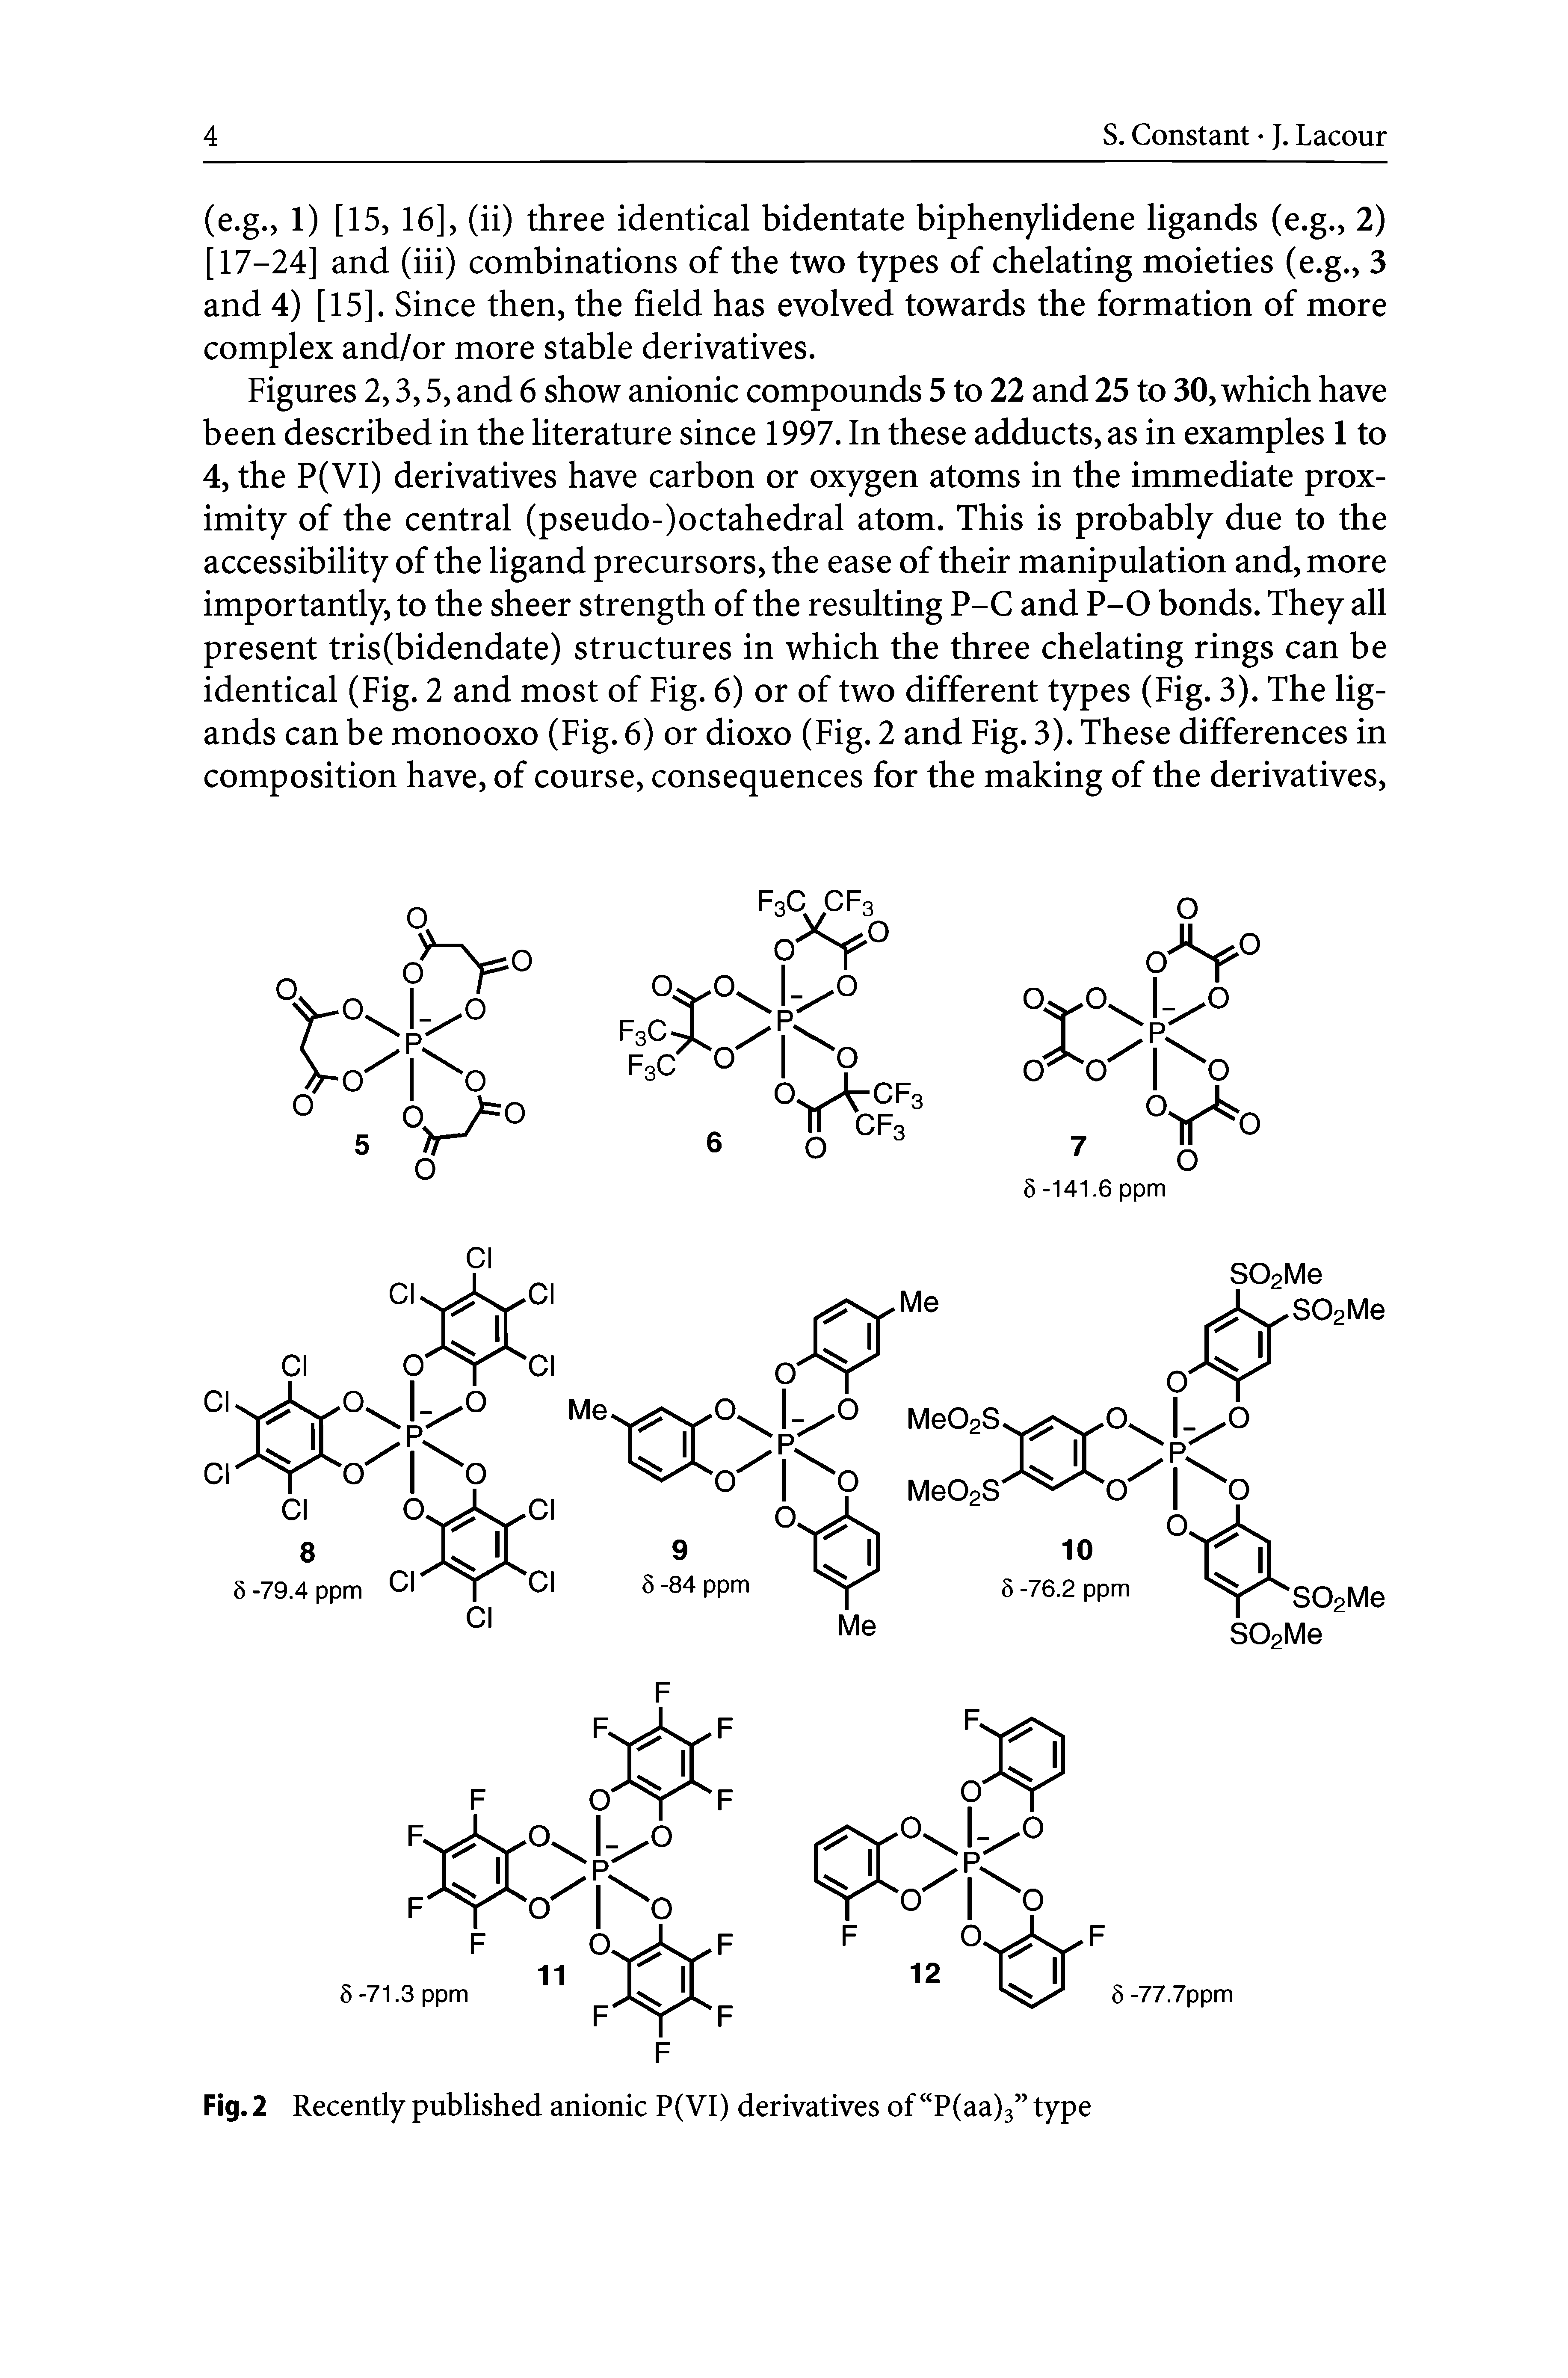 Figures 2,3,5, and 6 show anionic compounds 5 to 22 and 25 to 30, which have been described in the literature since 1997. In these adducts, as in examples 1 to 4, the P(VI) derivatives have carbon or oxygen atoms in the immediate proximity of the central (pseudo-)octahedral atom. This is probably due to the accessibility of the ligand precursors, the ease of their manipulation and, more importantly, to the sheer strength of the resulting P-C and P-0 bonds. They all present tris(bidendate) structures in which the three chelating rings can be identical (Fig. 2 and most of Fig. 6) or of two different types (Fig. 3). The ligands can be monooxo (Fig. 6) or dioxo (Fig. 2 and Fig. 3). These differences in composition have, of course, consequences for the making of the derivatives.